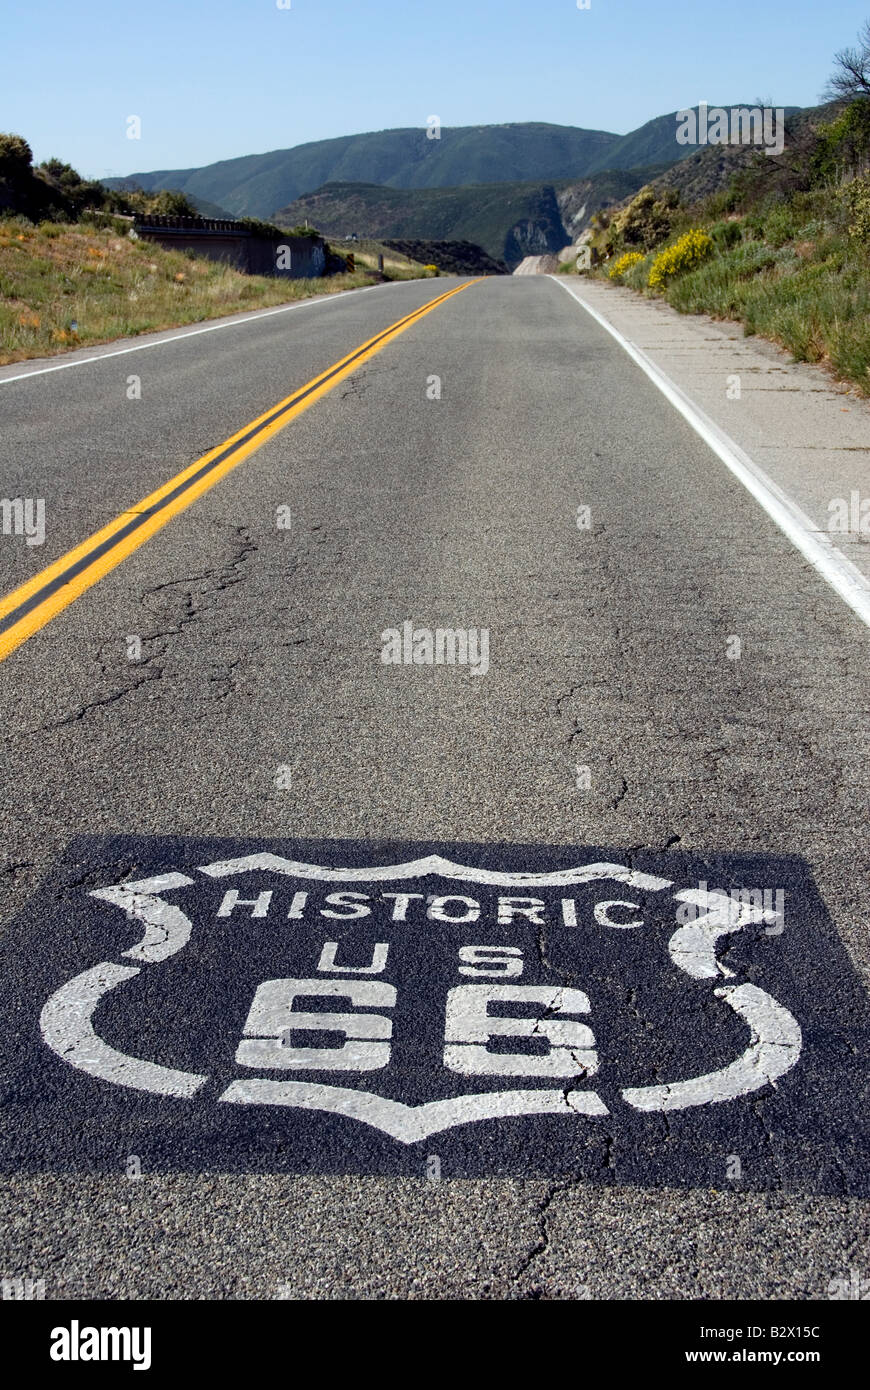 historic route 66 american road sign los angeles, CA, California, usa, cajon summit, cleghorn rd, highway 66 Stock Photo